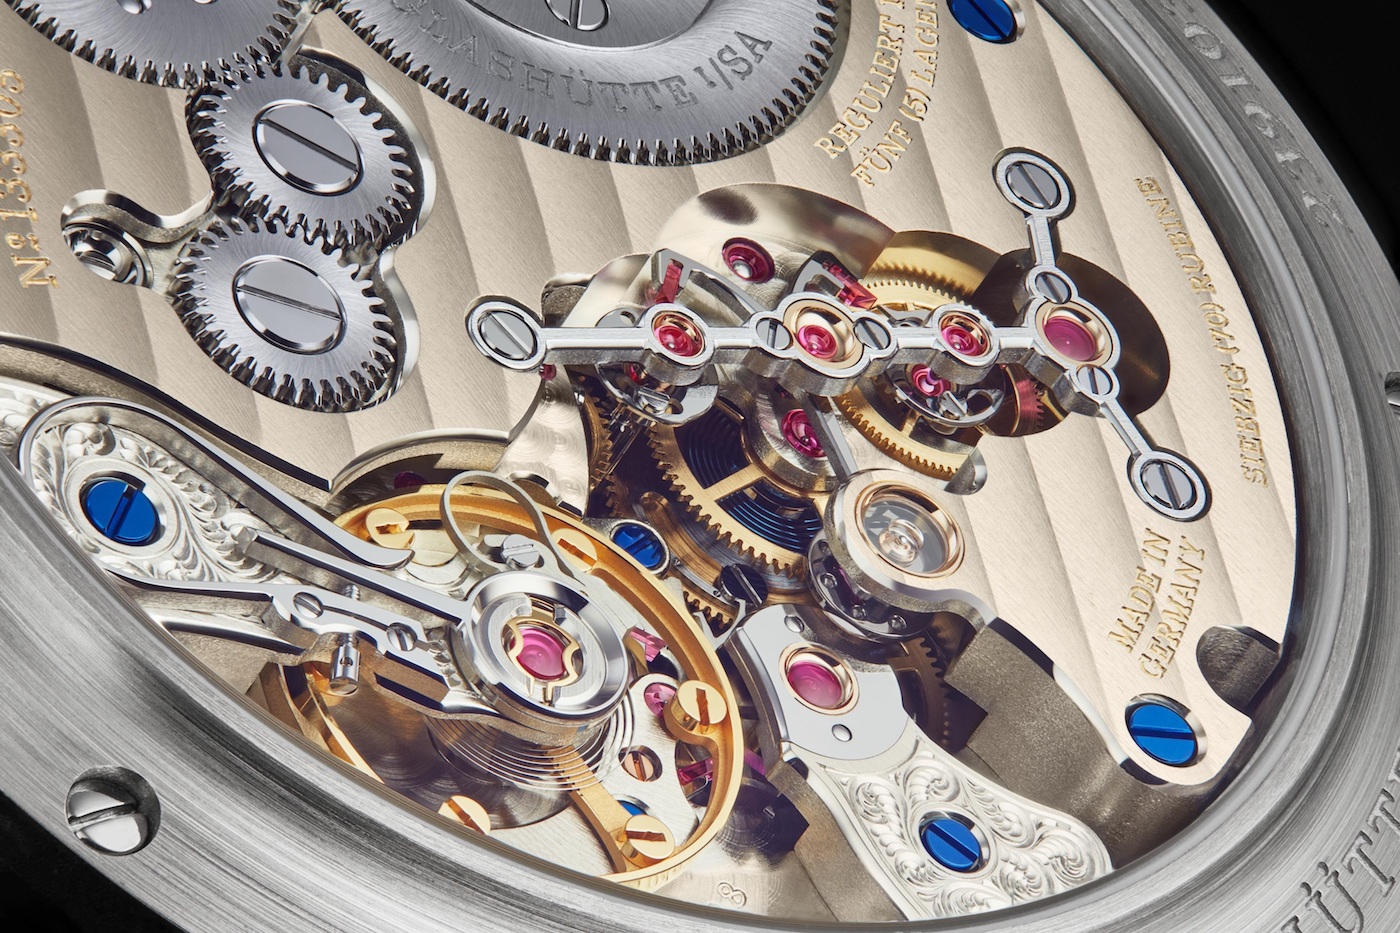 9th Annual Madison Avenue Watch Week June 10 ? 15, 2019 Puts a New Focus on Master Watchmakers